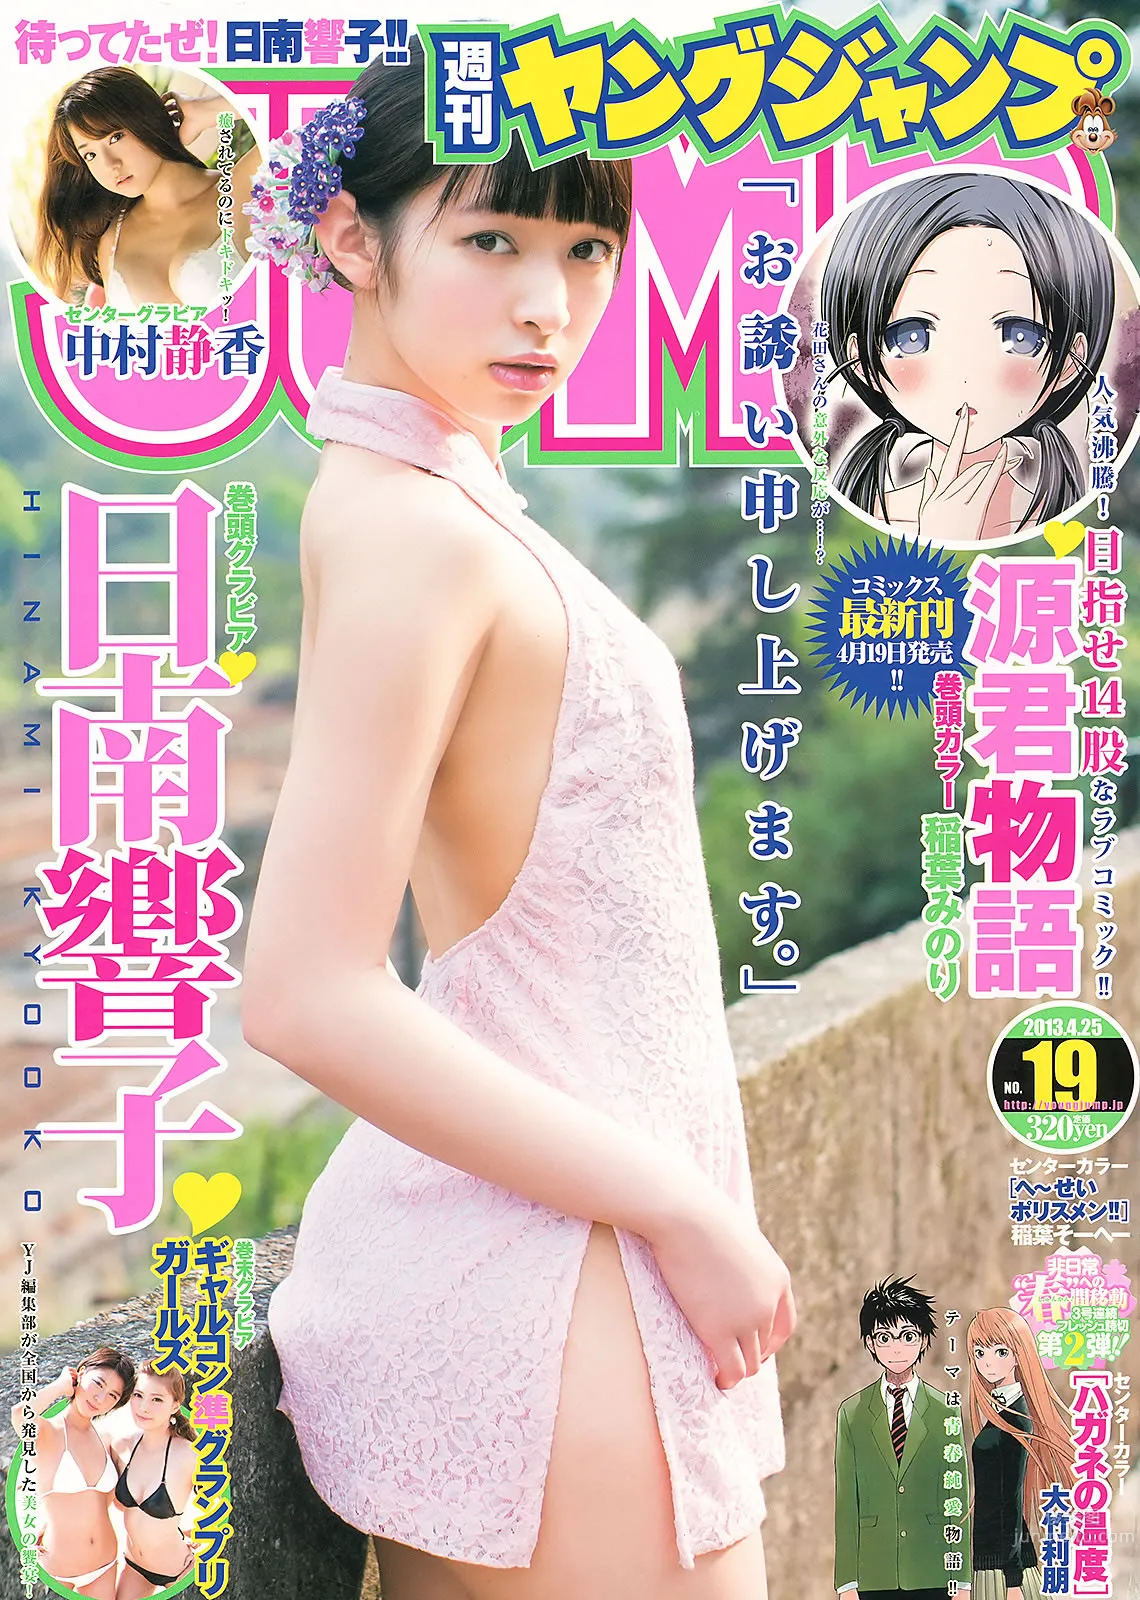 [Weekly Young Jump] 2013 No.18 19 日南响子 中村静香 モーニング娘。 西内まりや [28P]_0